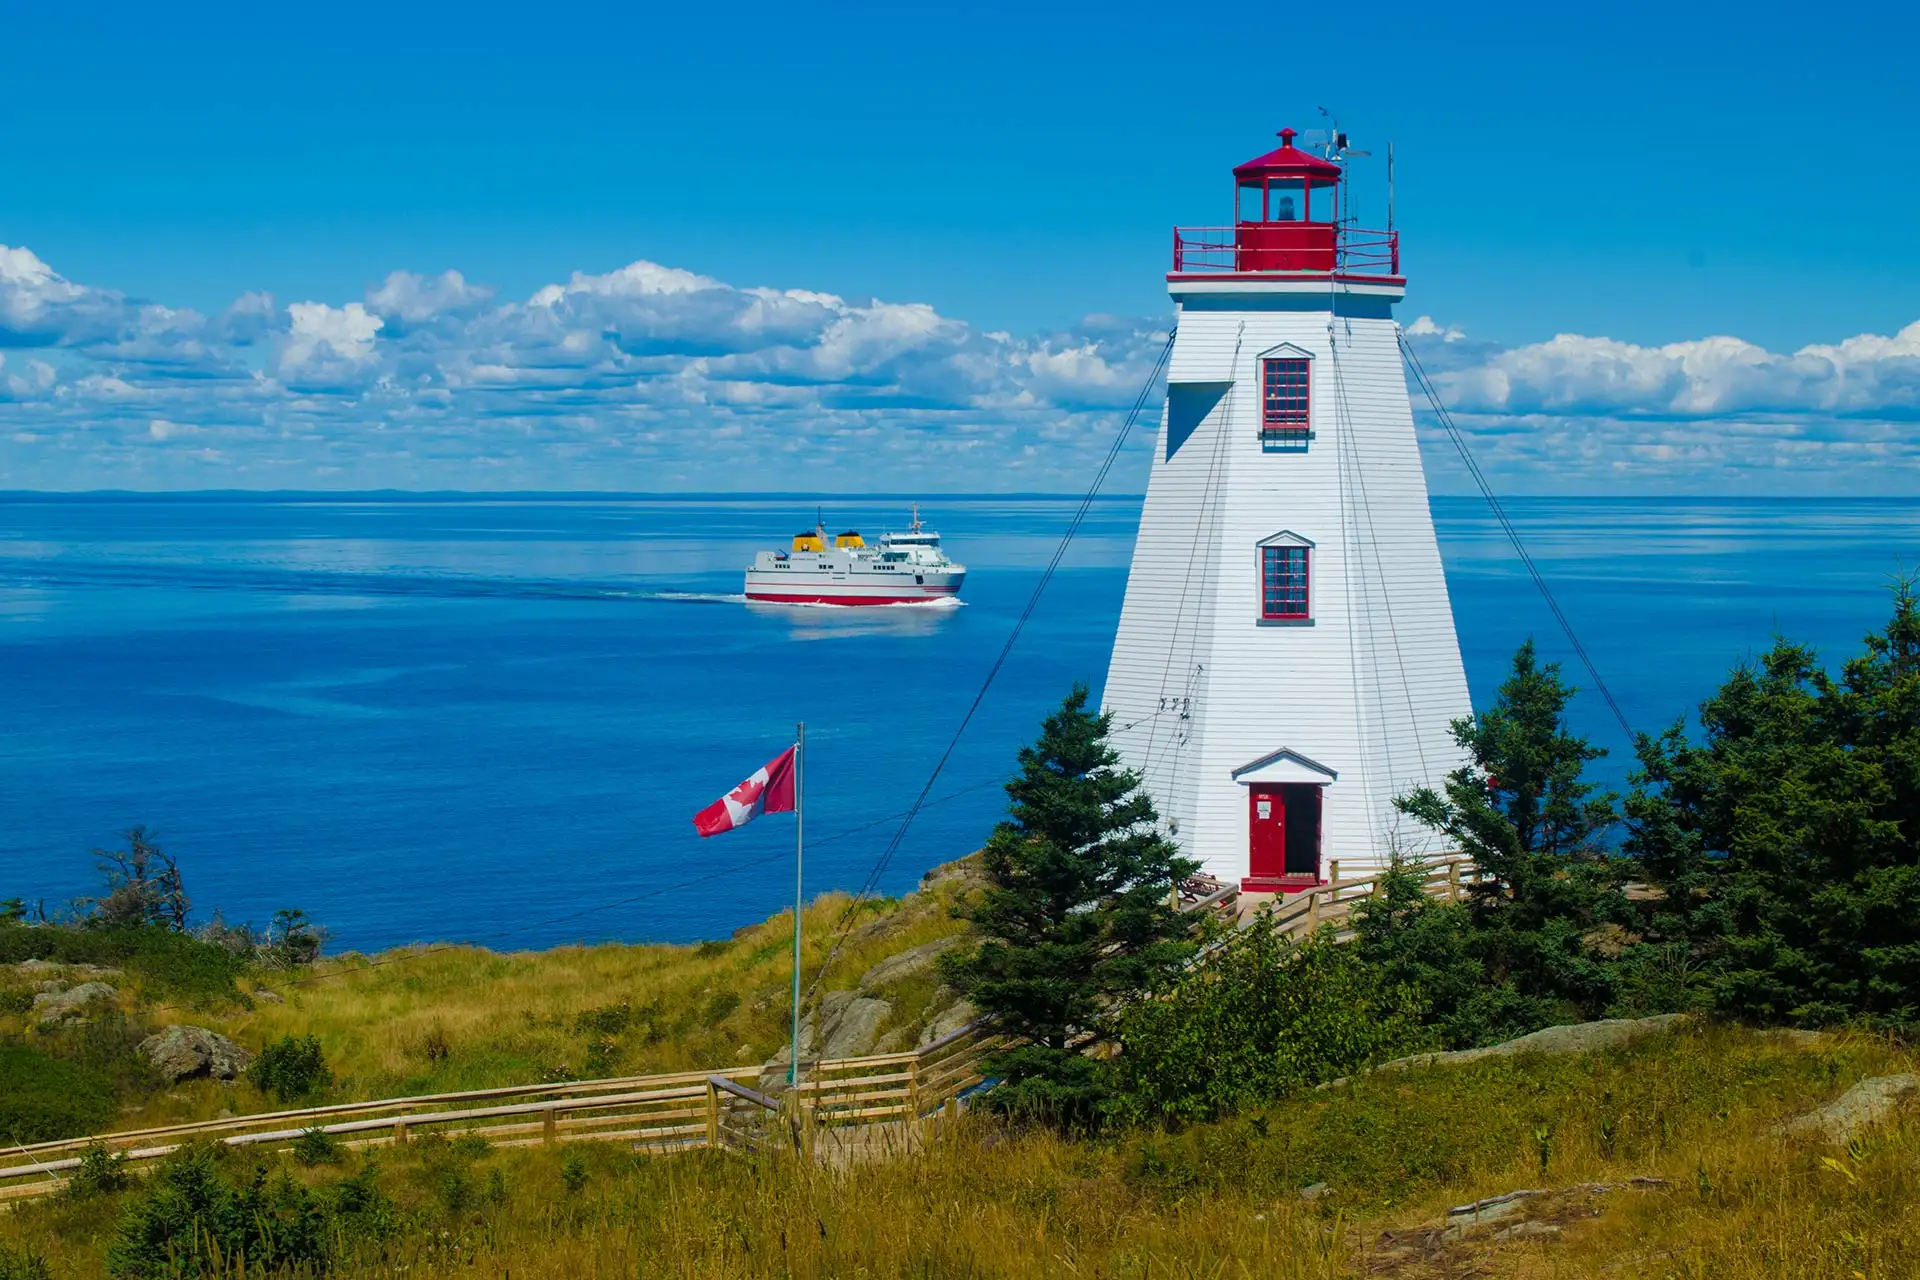 Swallowtail Lighthouse on Grand Manan Island, NB, Canada; Courtesy of VH Creations/Shutterstock